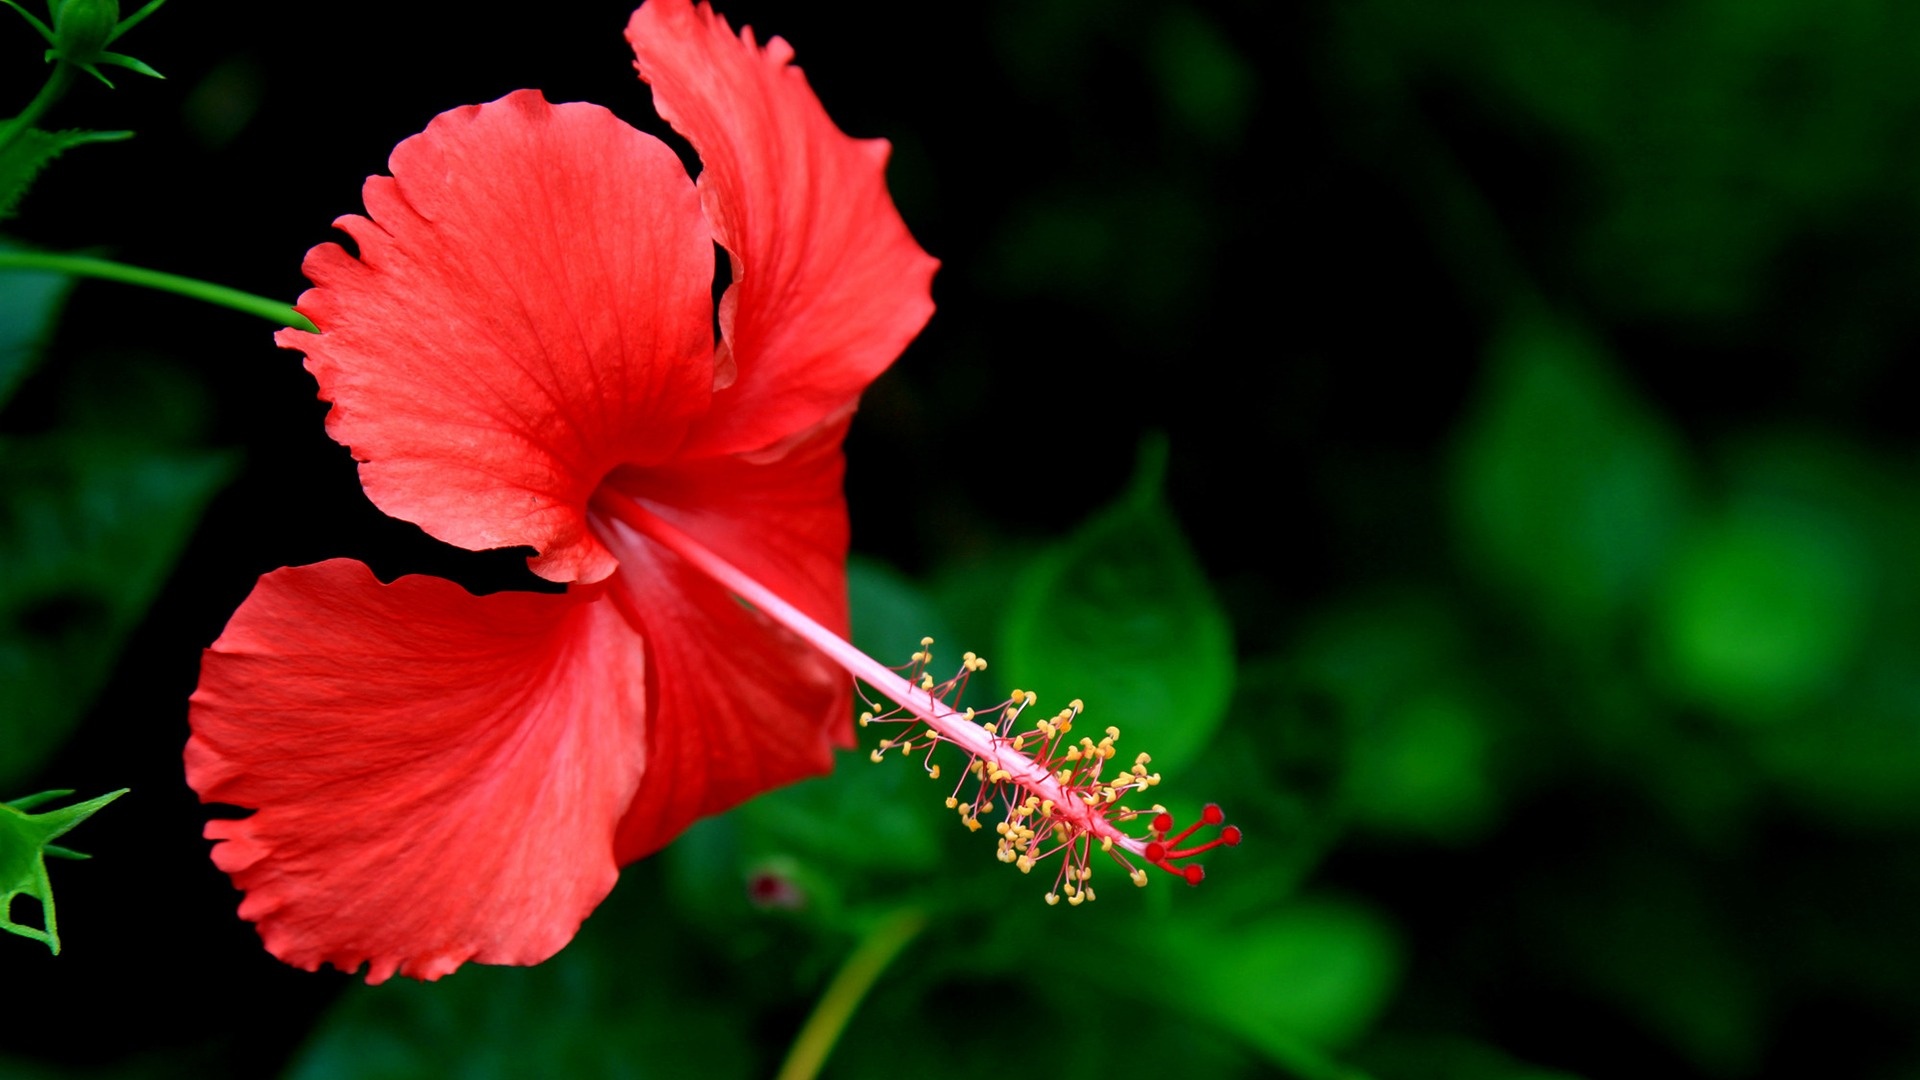 Gorgeous hibiscus, Stunning floral display, Nature's artwork, Vibrant colors, 1920x1080 Full HD Desktop